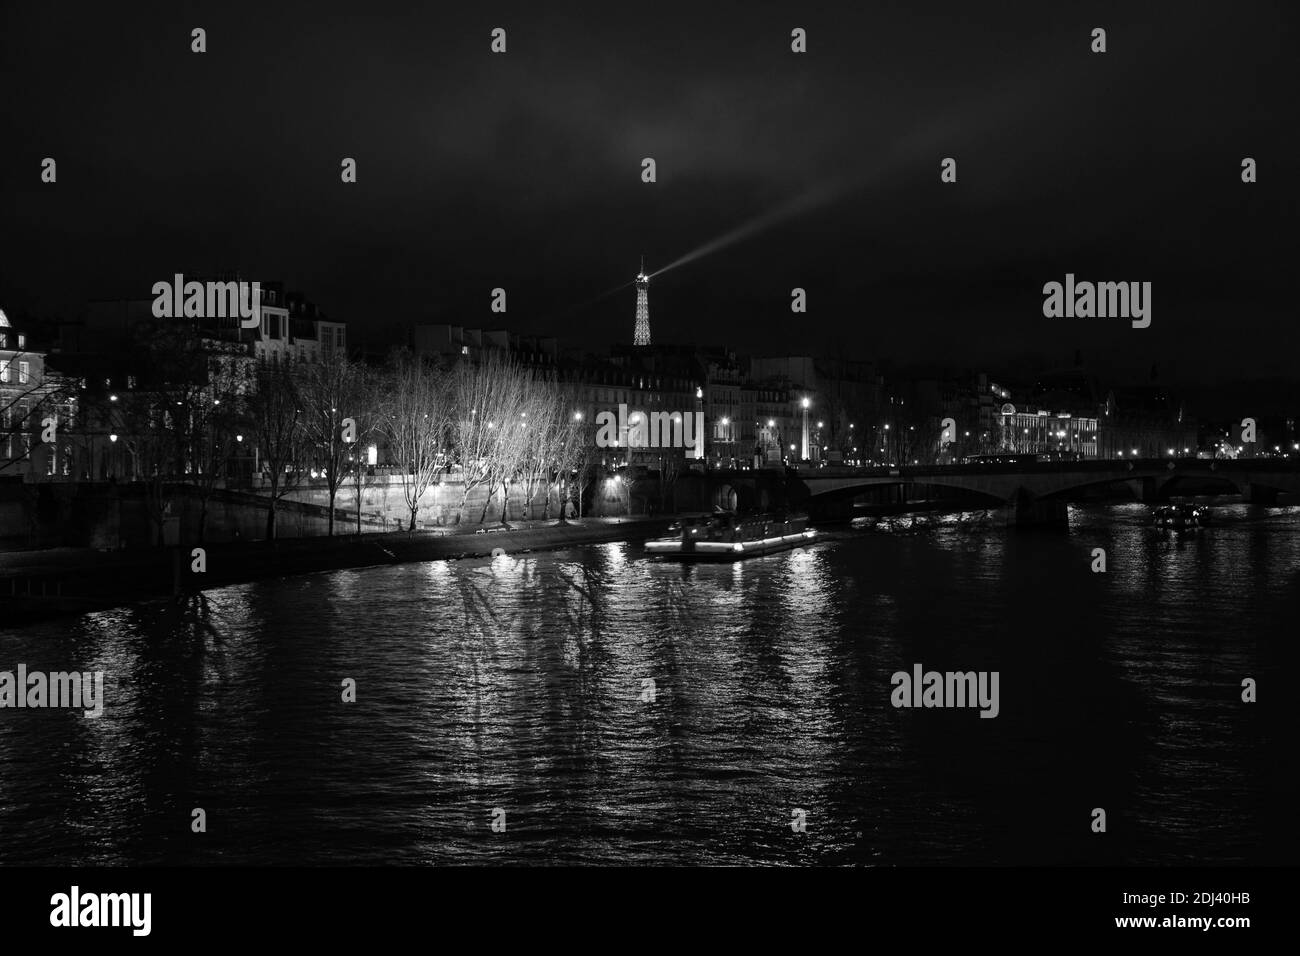 PARIS, FRANCE - DECEMBER 2, 2018:  Night view of illuminated Eiffel tower and Seine river landscape. Black white photo Stock Photo